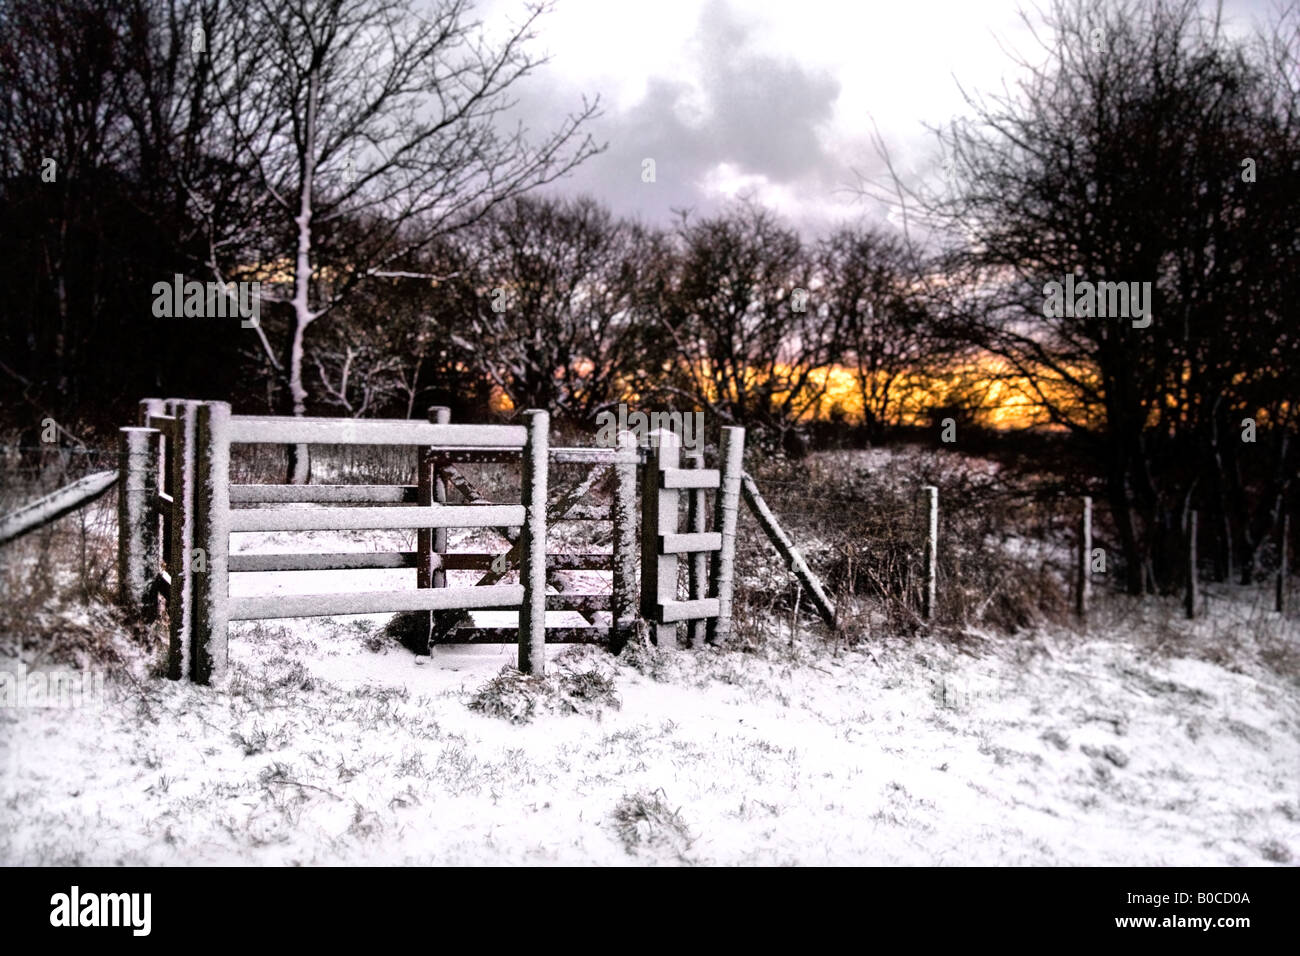 Ambient winter image with snow at a local nature reserve near Bury Lancashire UK Stock Photo